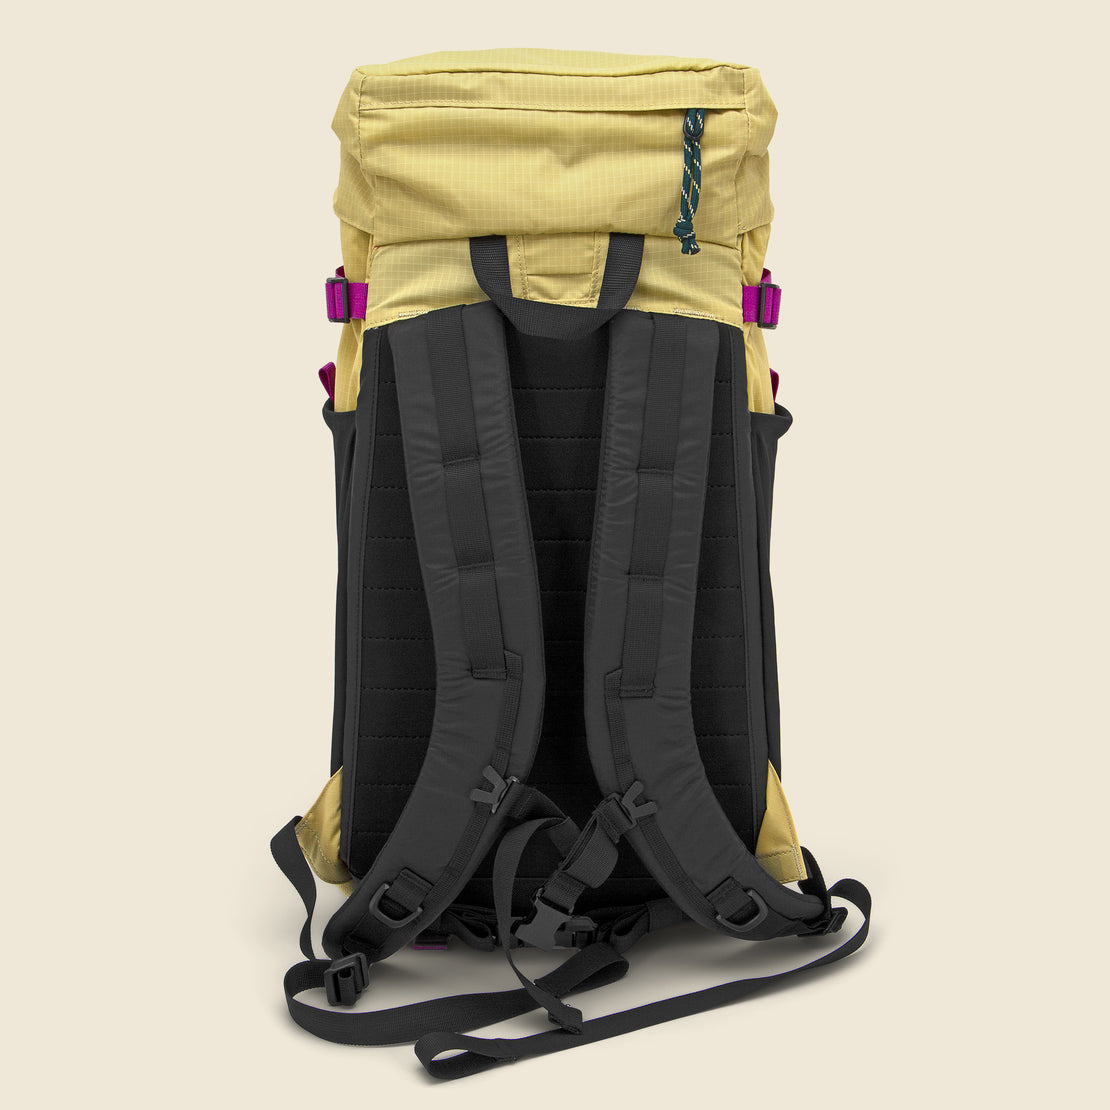 Mountain Pack 16L - Hemp/Bone Brown - Topo Designs - STAG Provisions - Accessories - Bags / Luggage